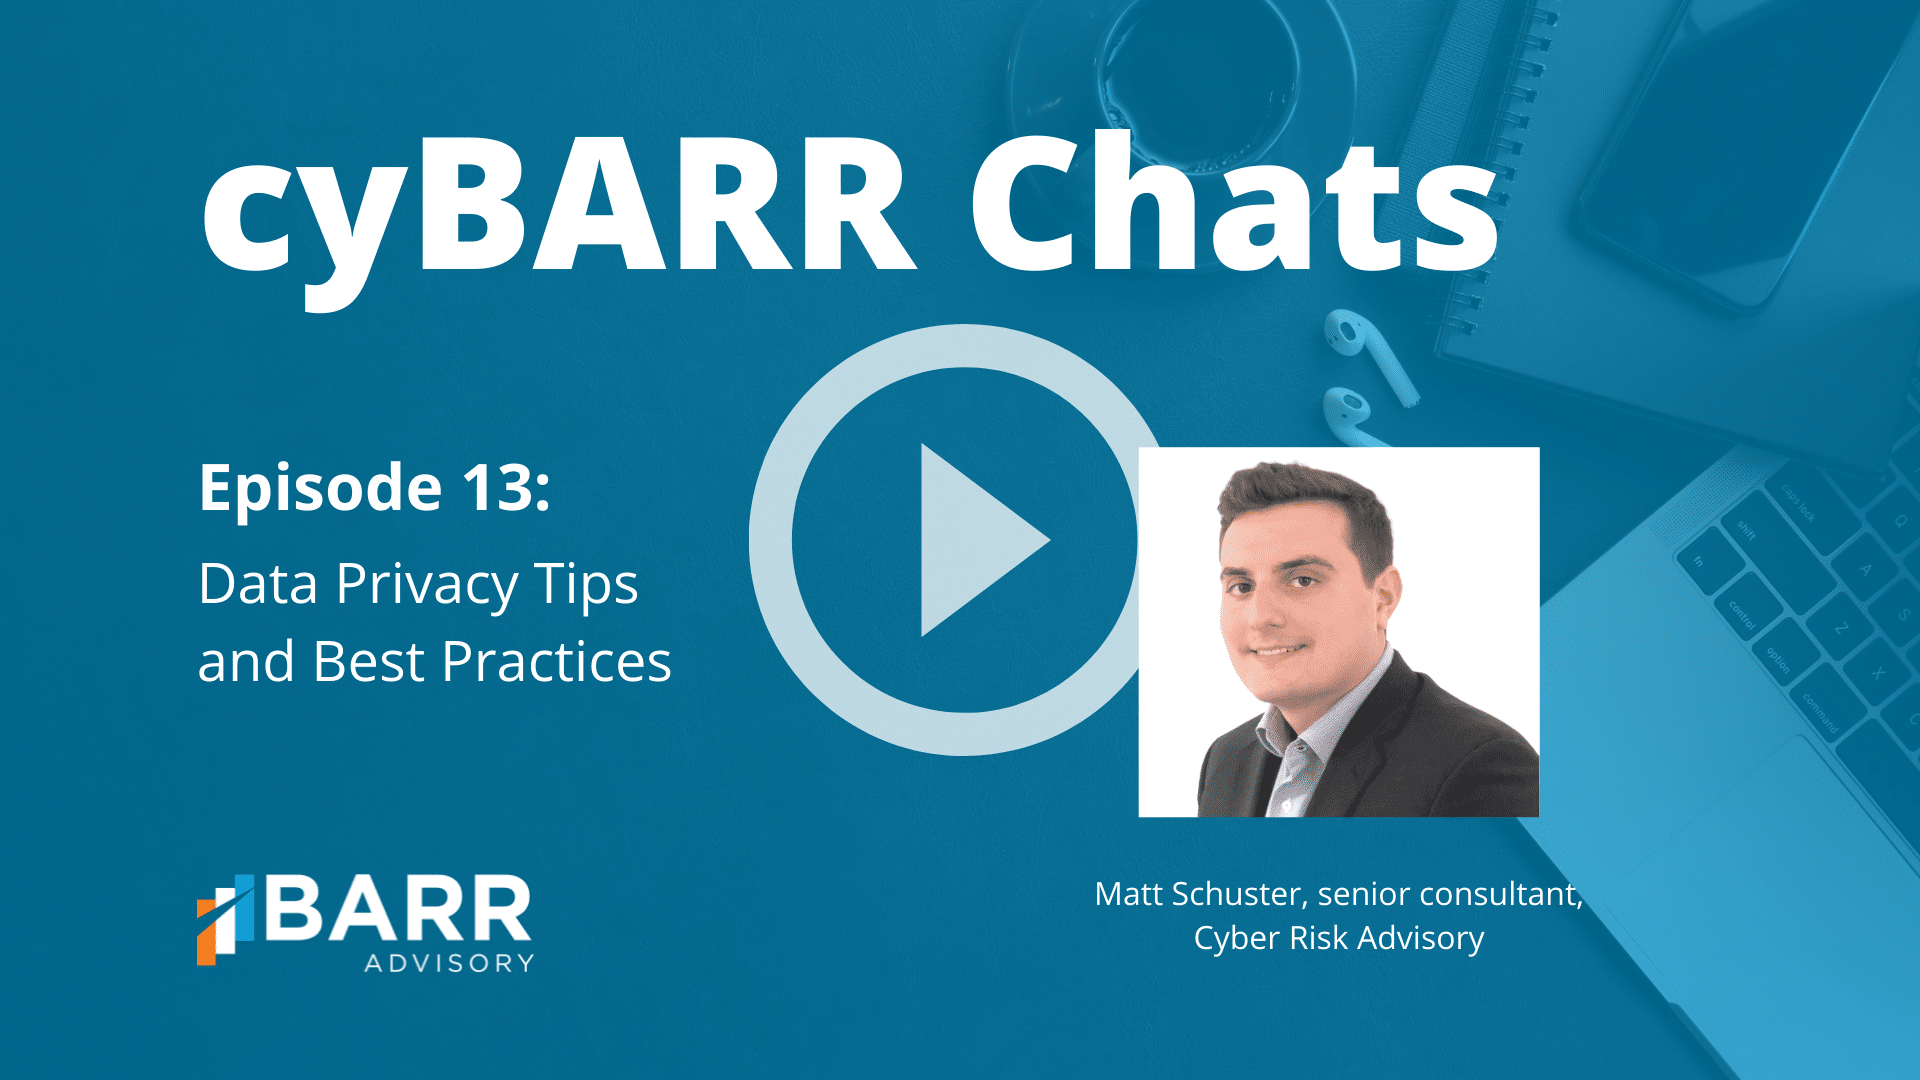 cyBARR Chats Episode 13: Data Privacy